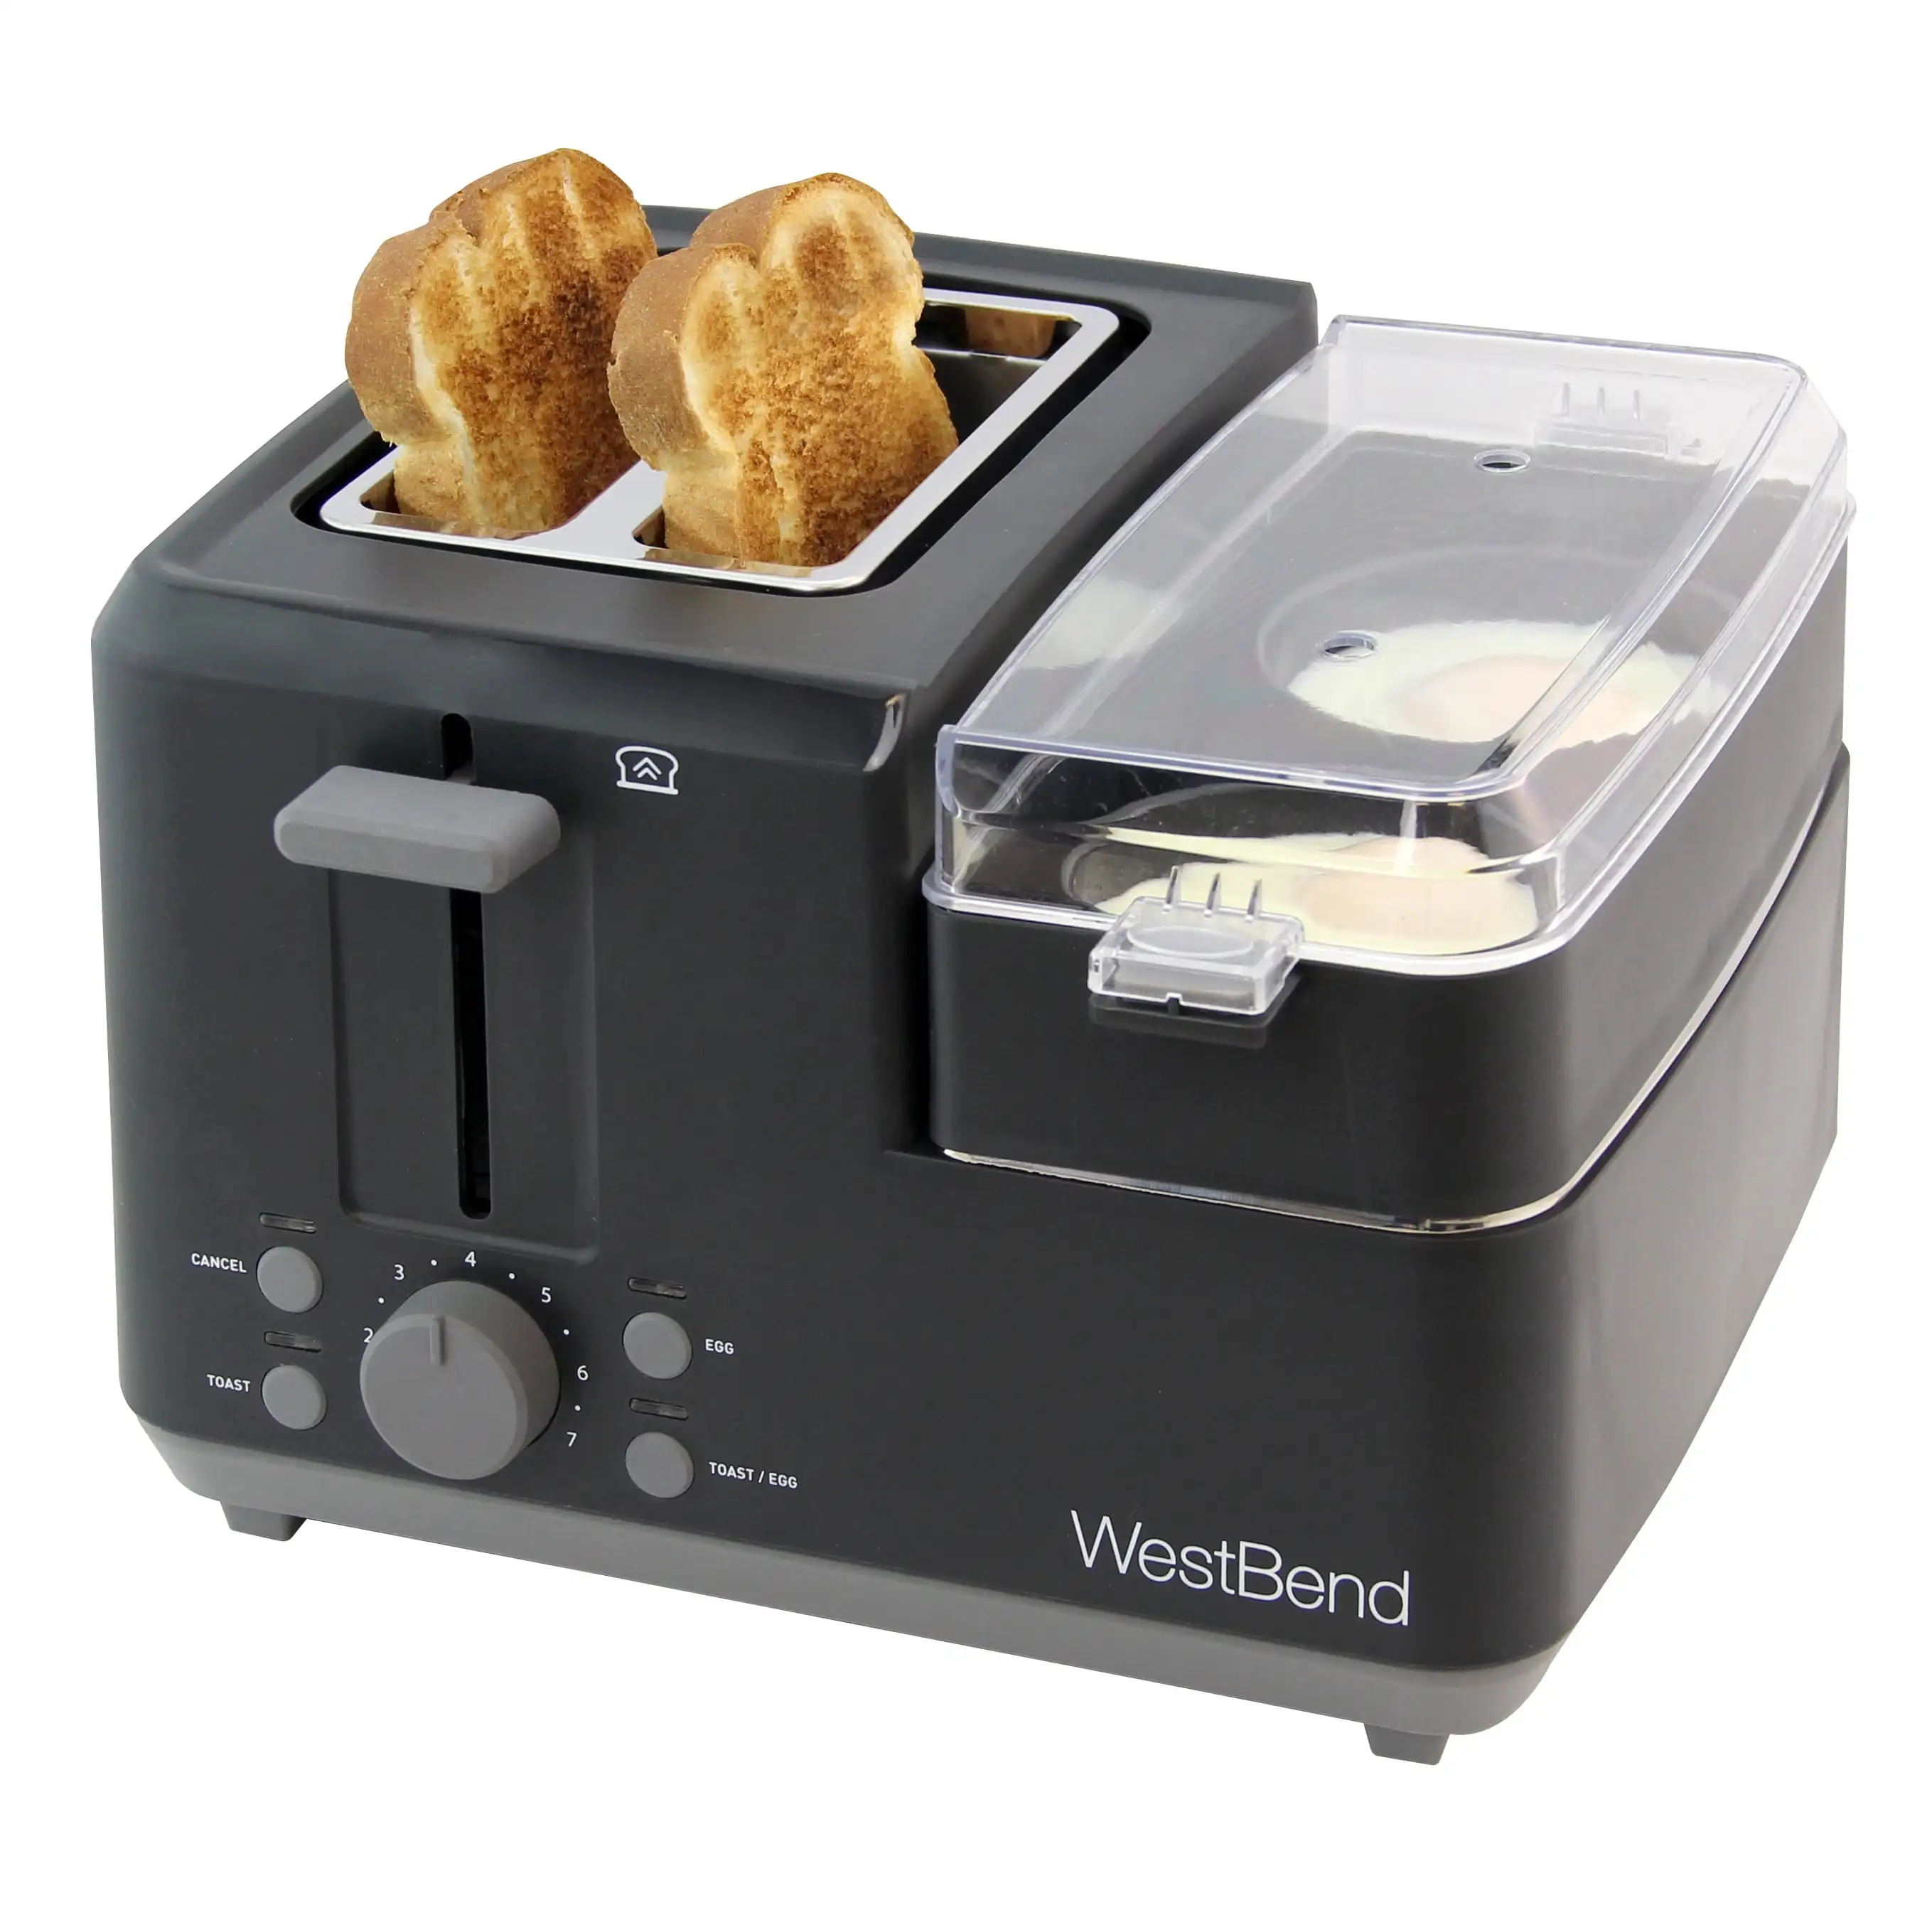 

2-Slice Breakfast Station Egg & Muffin Toaster, Baked Bread, English Muffins, Bagels, or Croissants